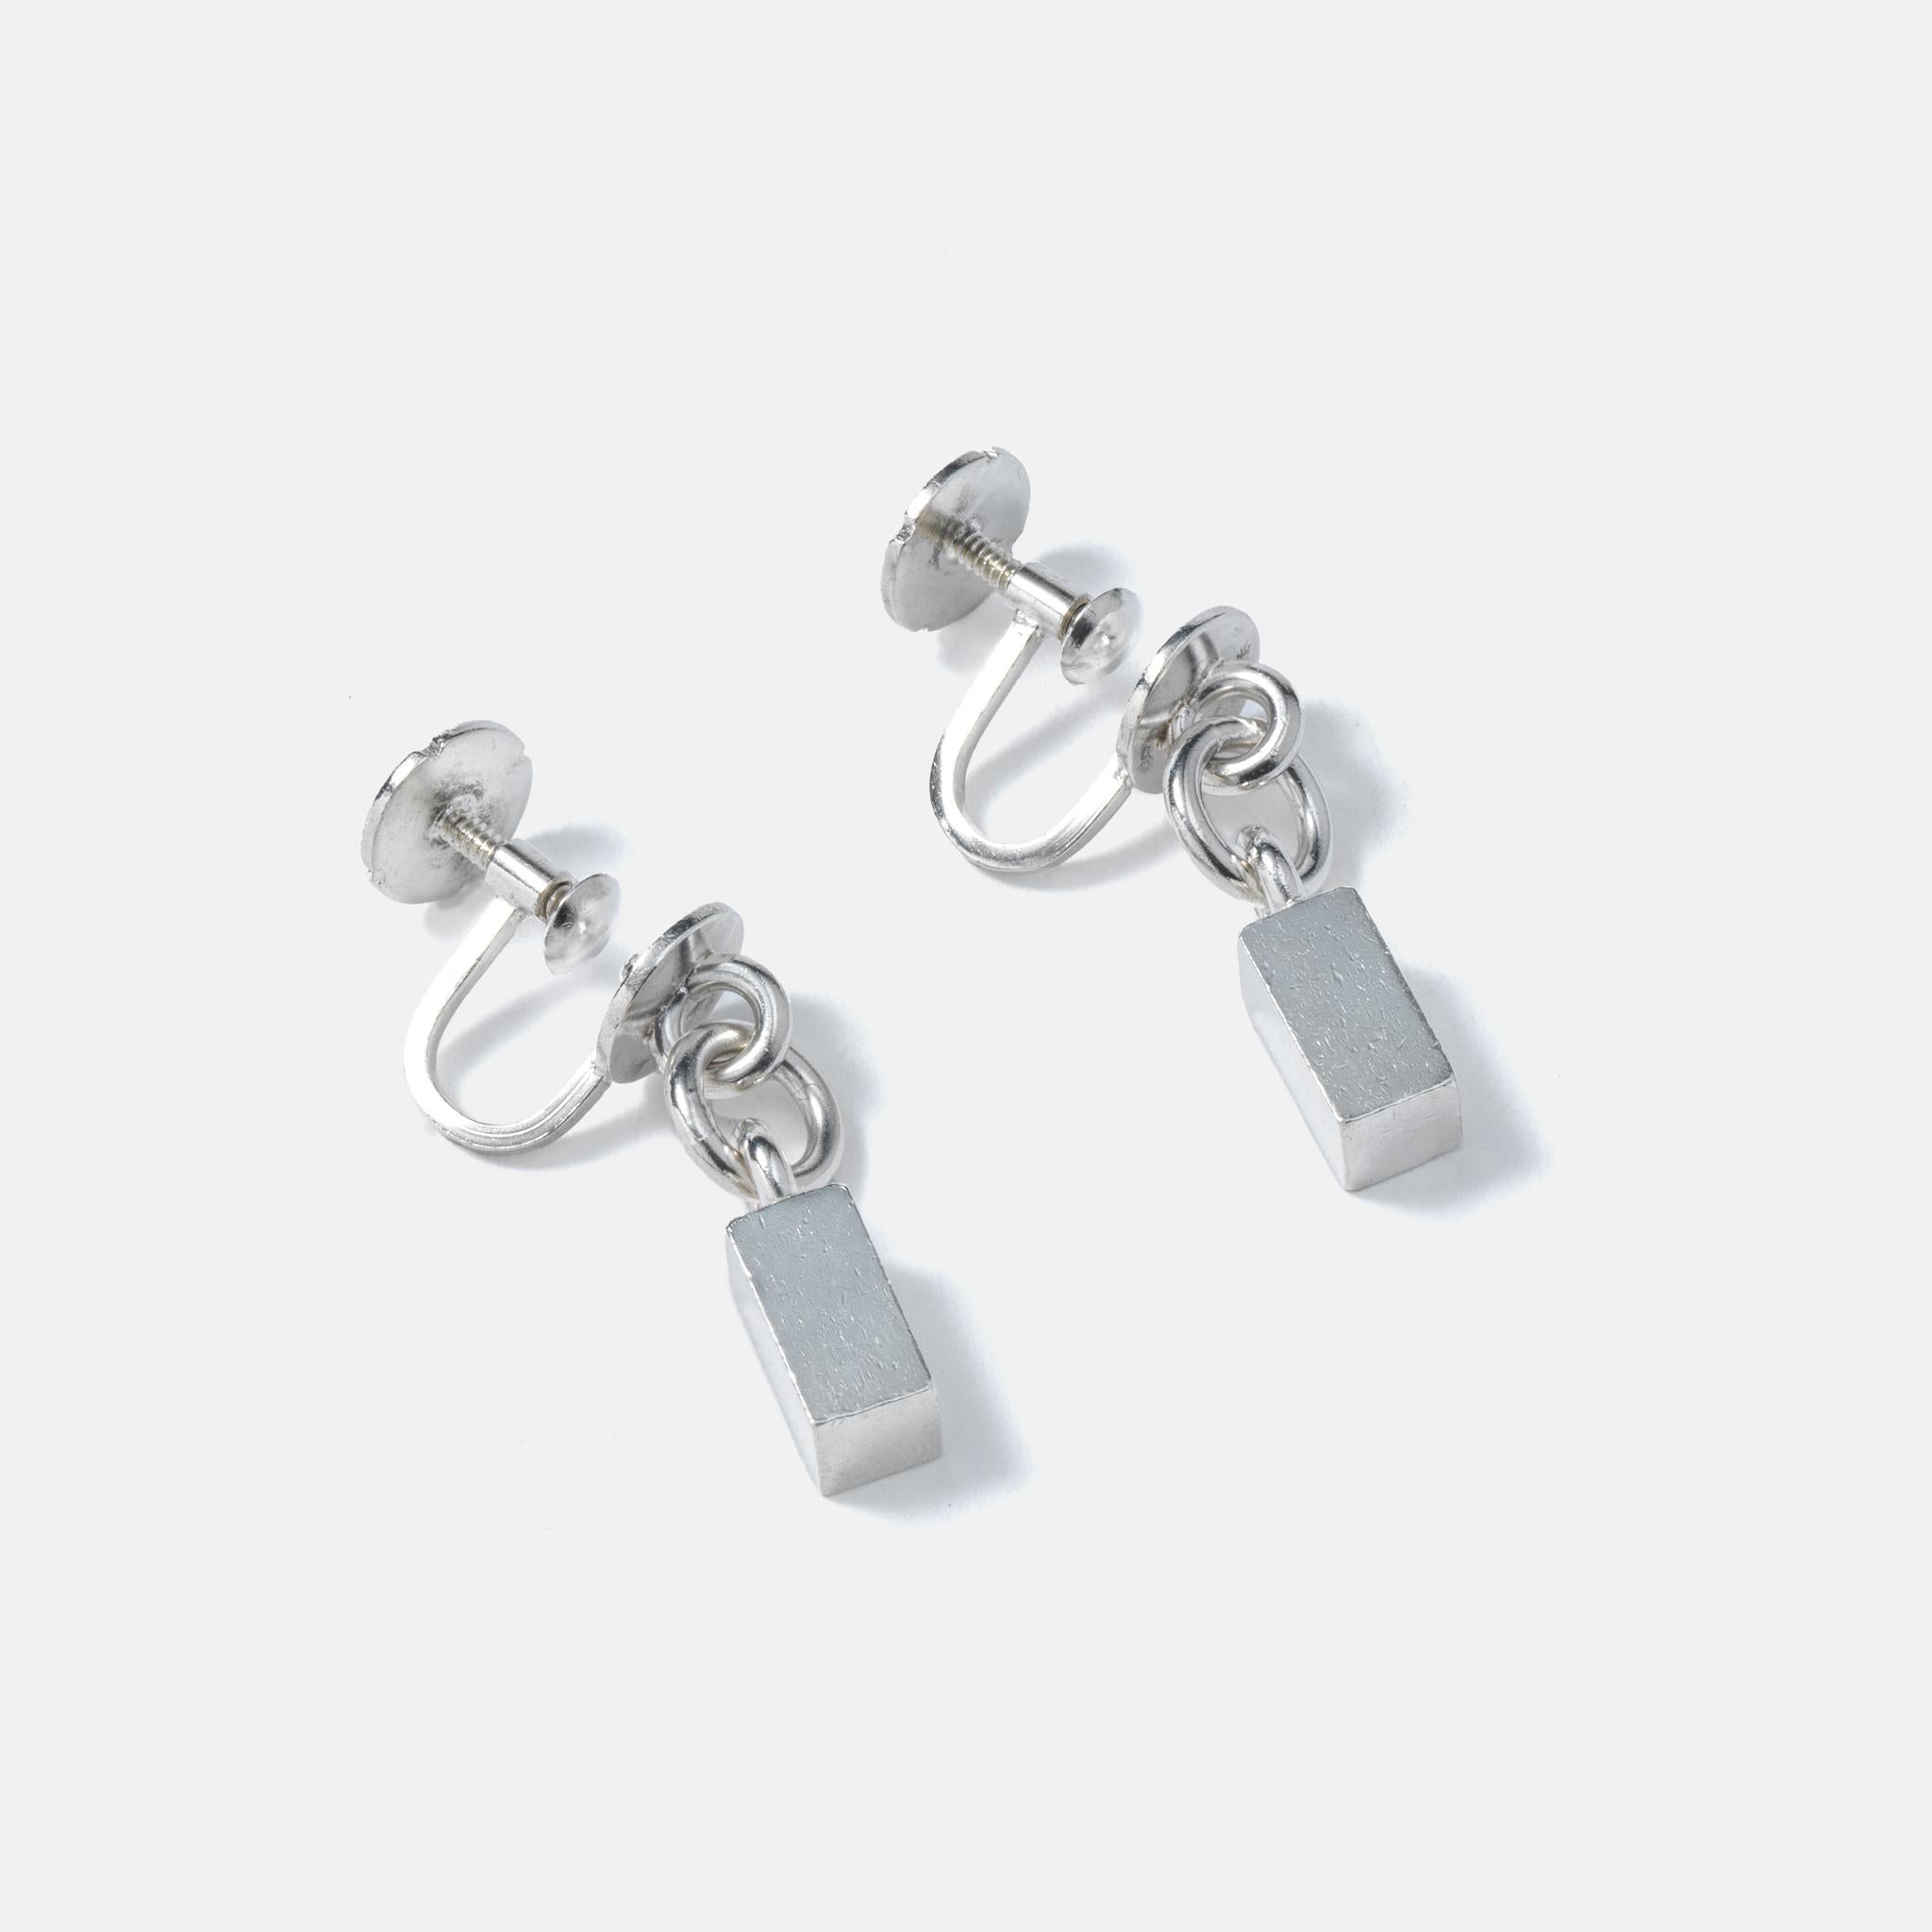 A pair of silver earrings made by Wiwen Nilsson, the most recogniced Swedish silversmith ever. This is a typical design for him using geometrical shapes for his jewelry.
Even the stamps are beautifully made, he was a perfectionist in all small